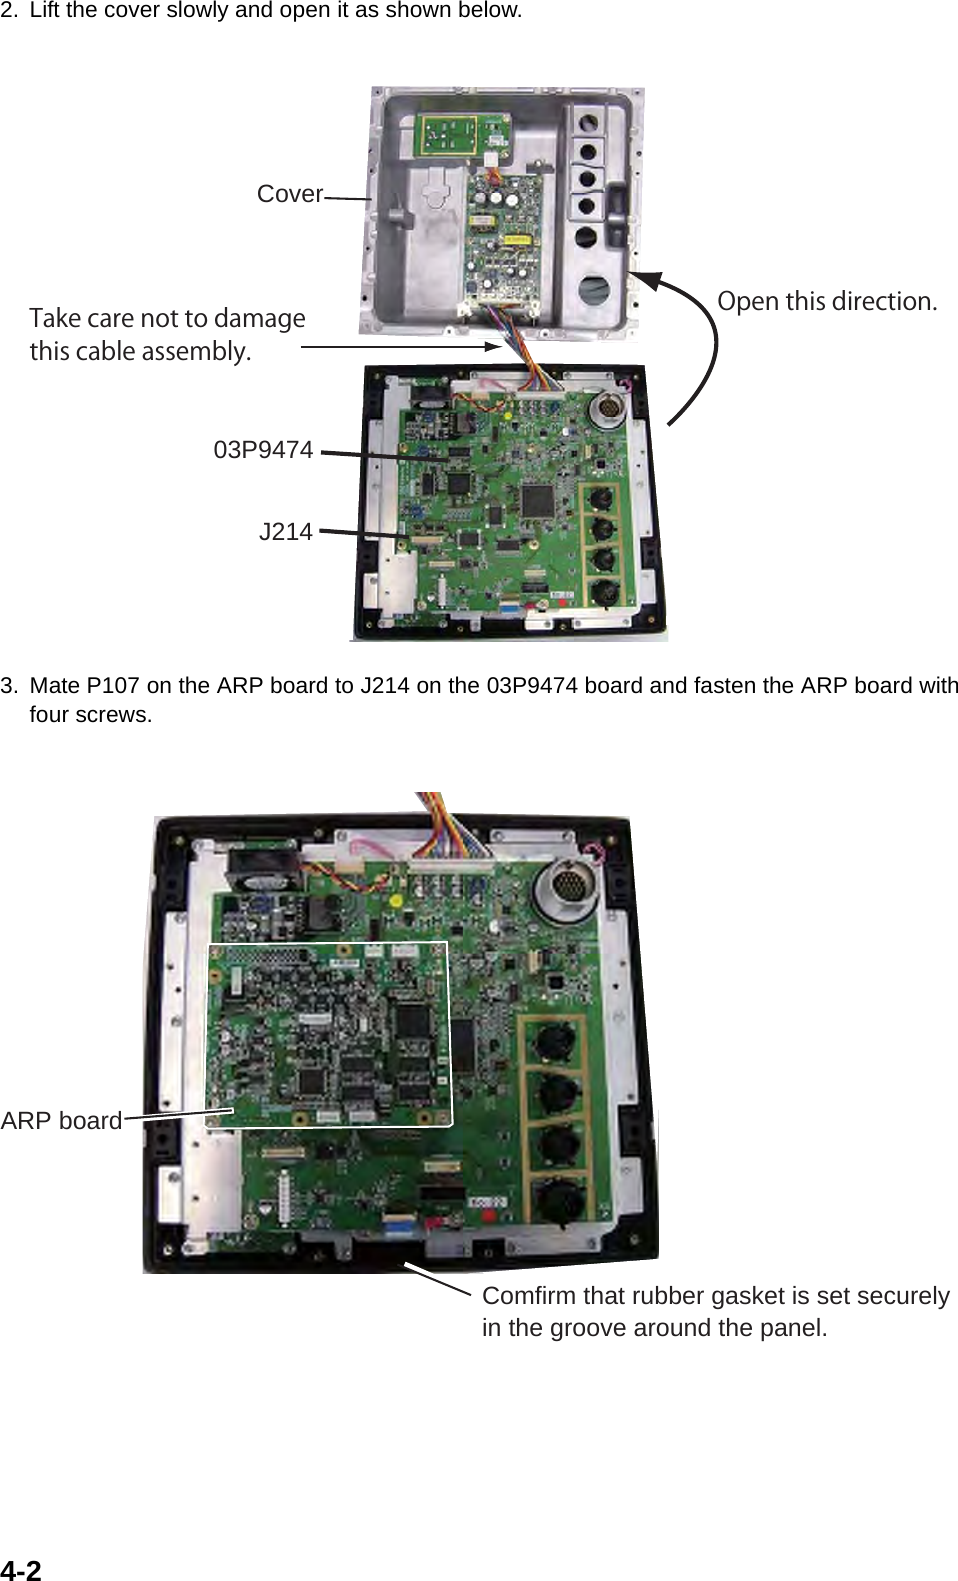 4-22. Lift the cover slowly and open it as shown below.3. Mate P107 on the ARP board to J214 on the 03P9474 board and fasten the ARP board with four screws.03P9474J214CoverOpen this direction.Take care not to damagethis cable assembly.ARP boardComfirm that rubber gasket is set securely in the groove around the panel.